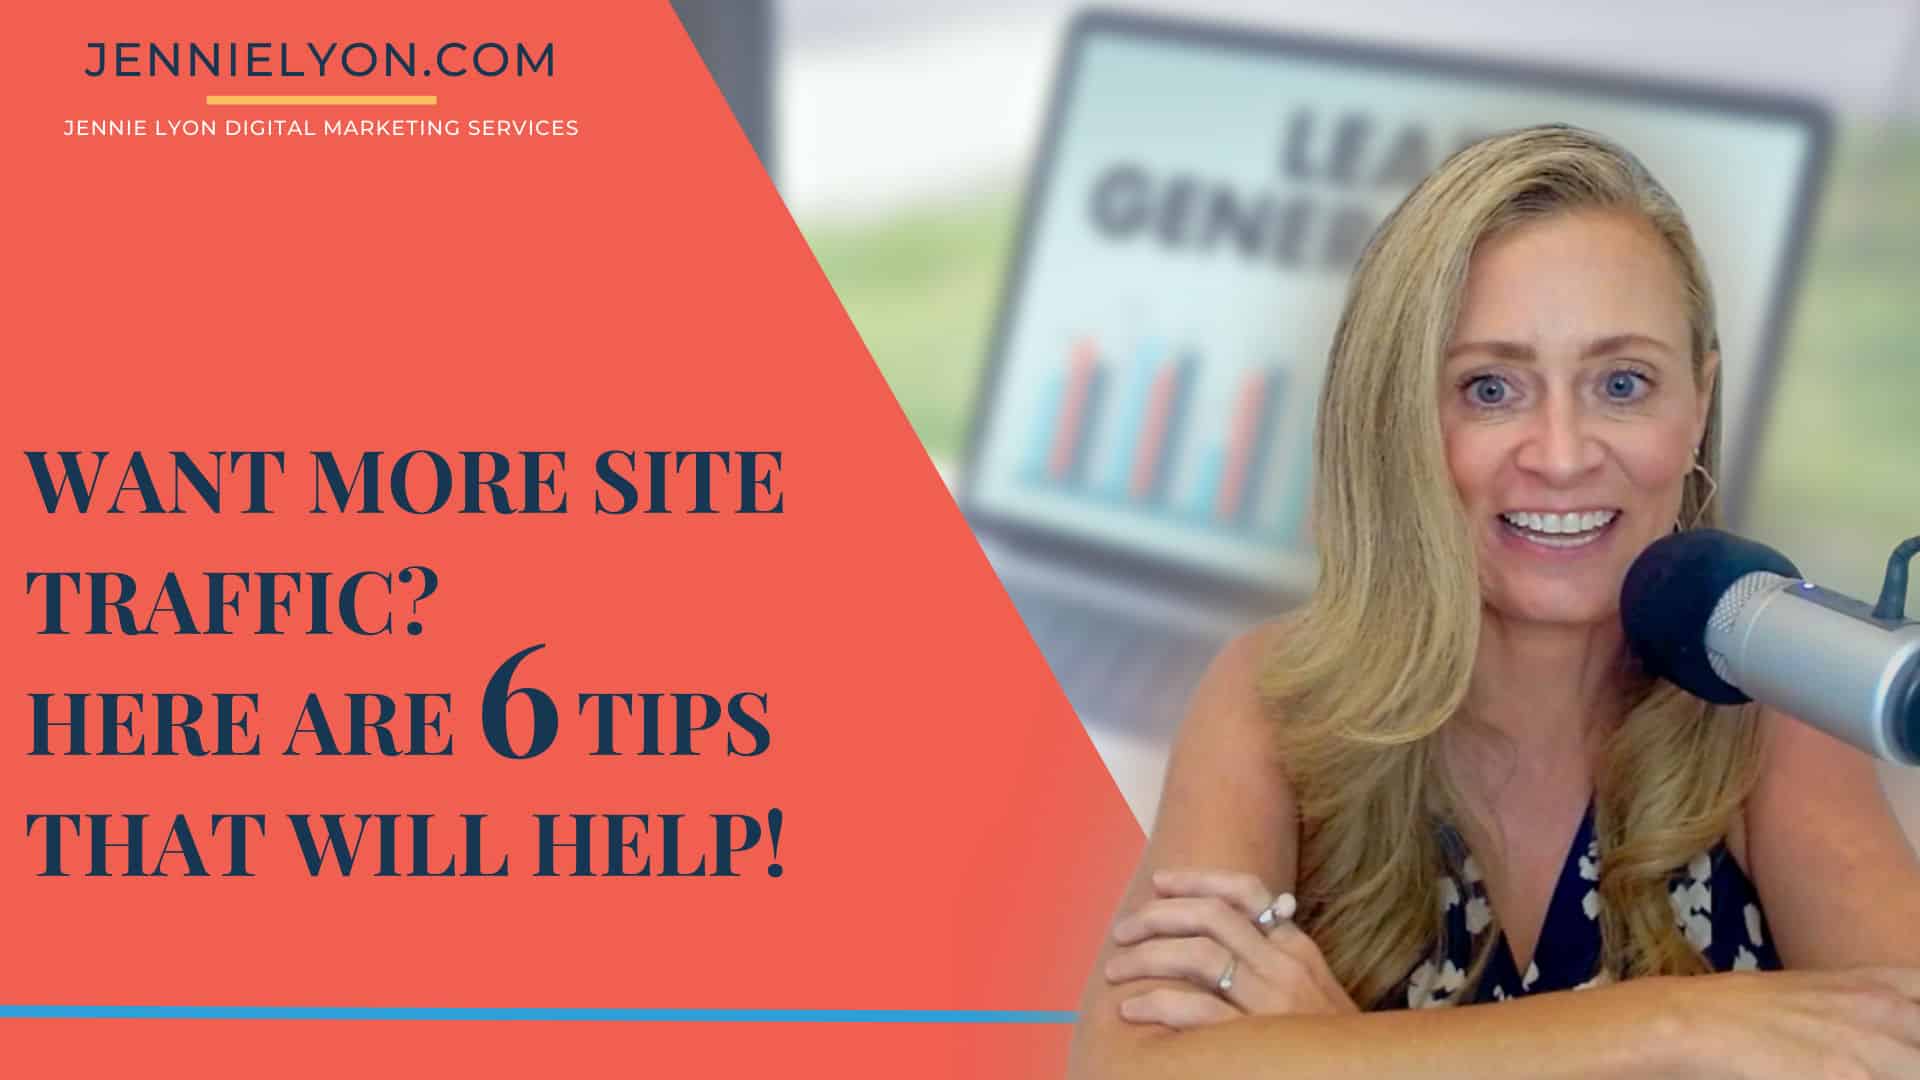 Want more site traffic? Here are 6 tips that will help!